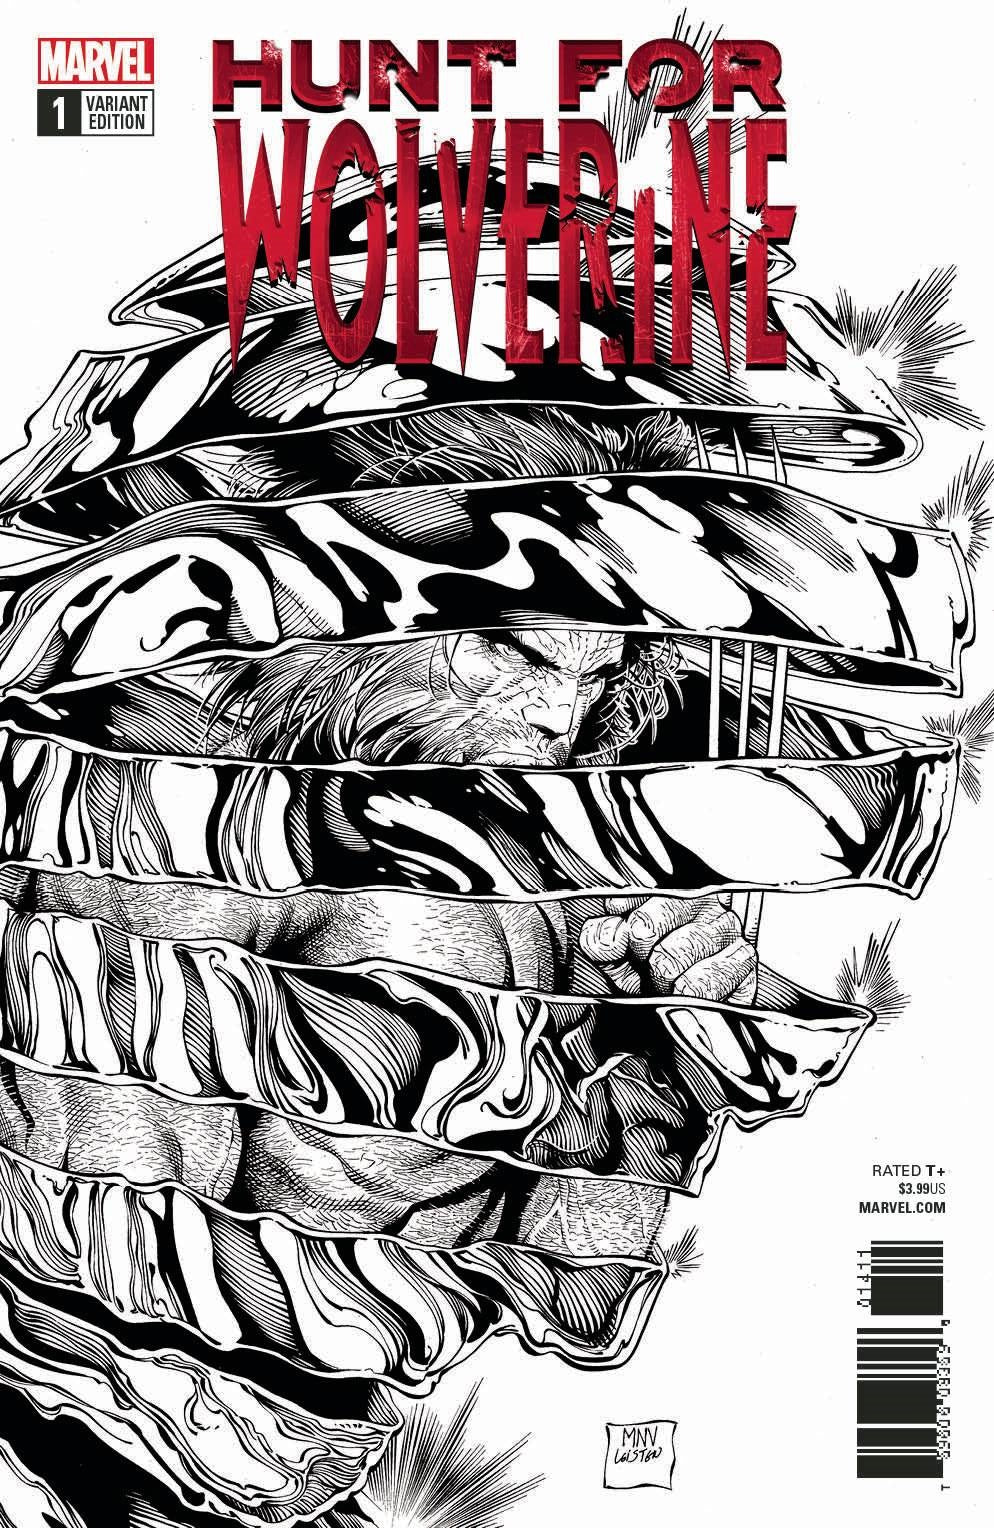 Hunt for Wolverine #1 McNiven 1:50 BW Ratio Variant